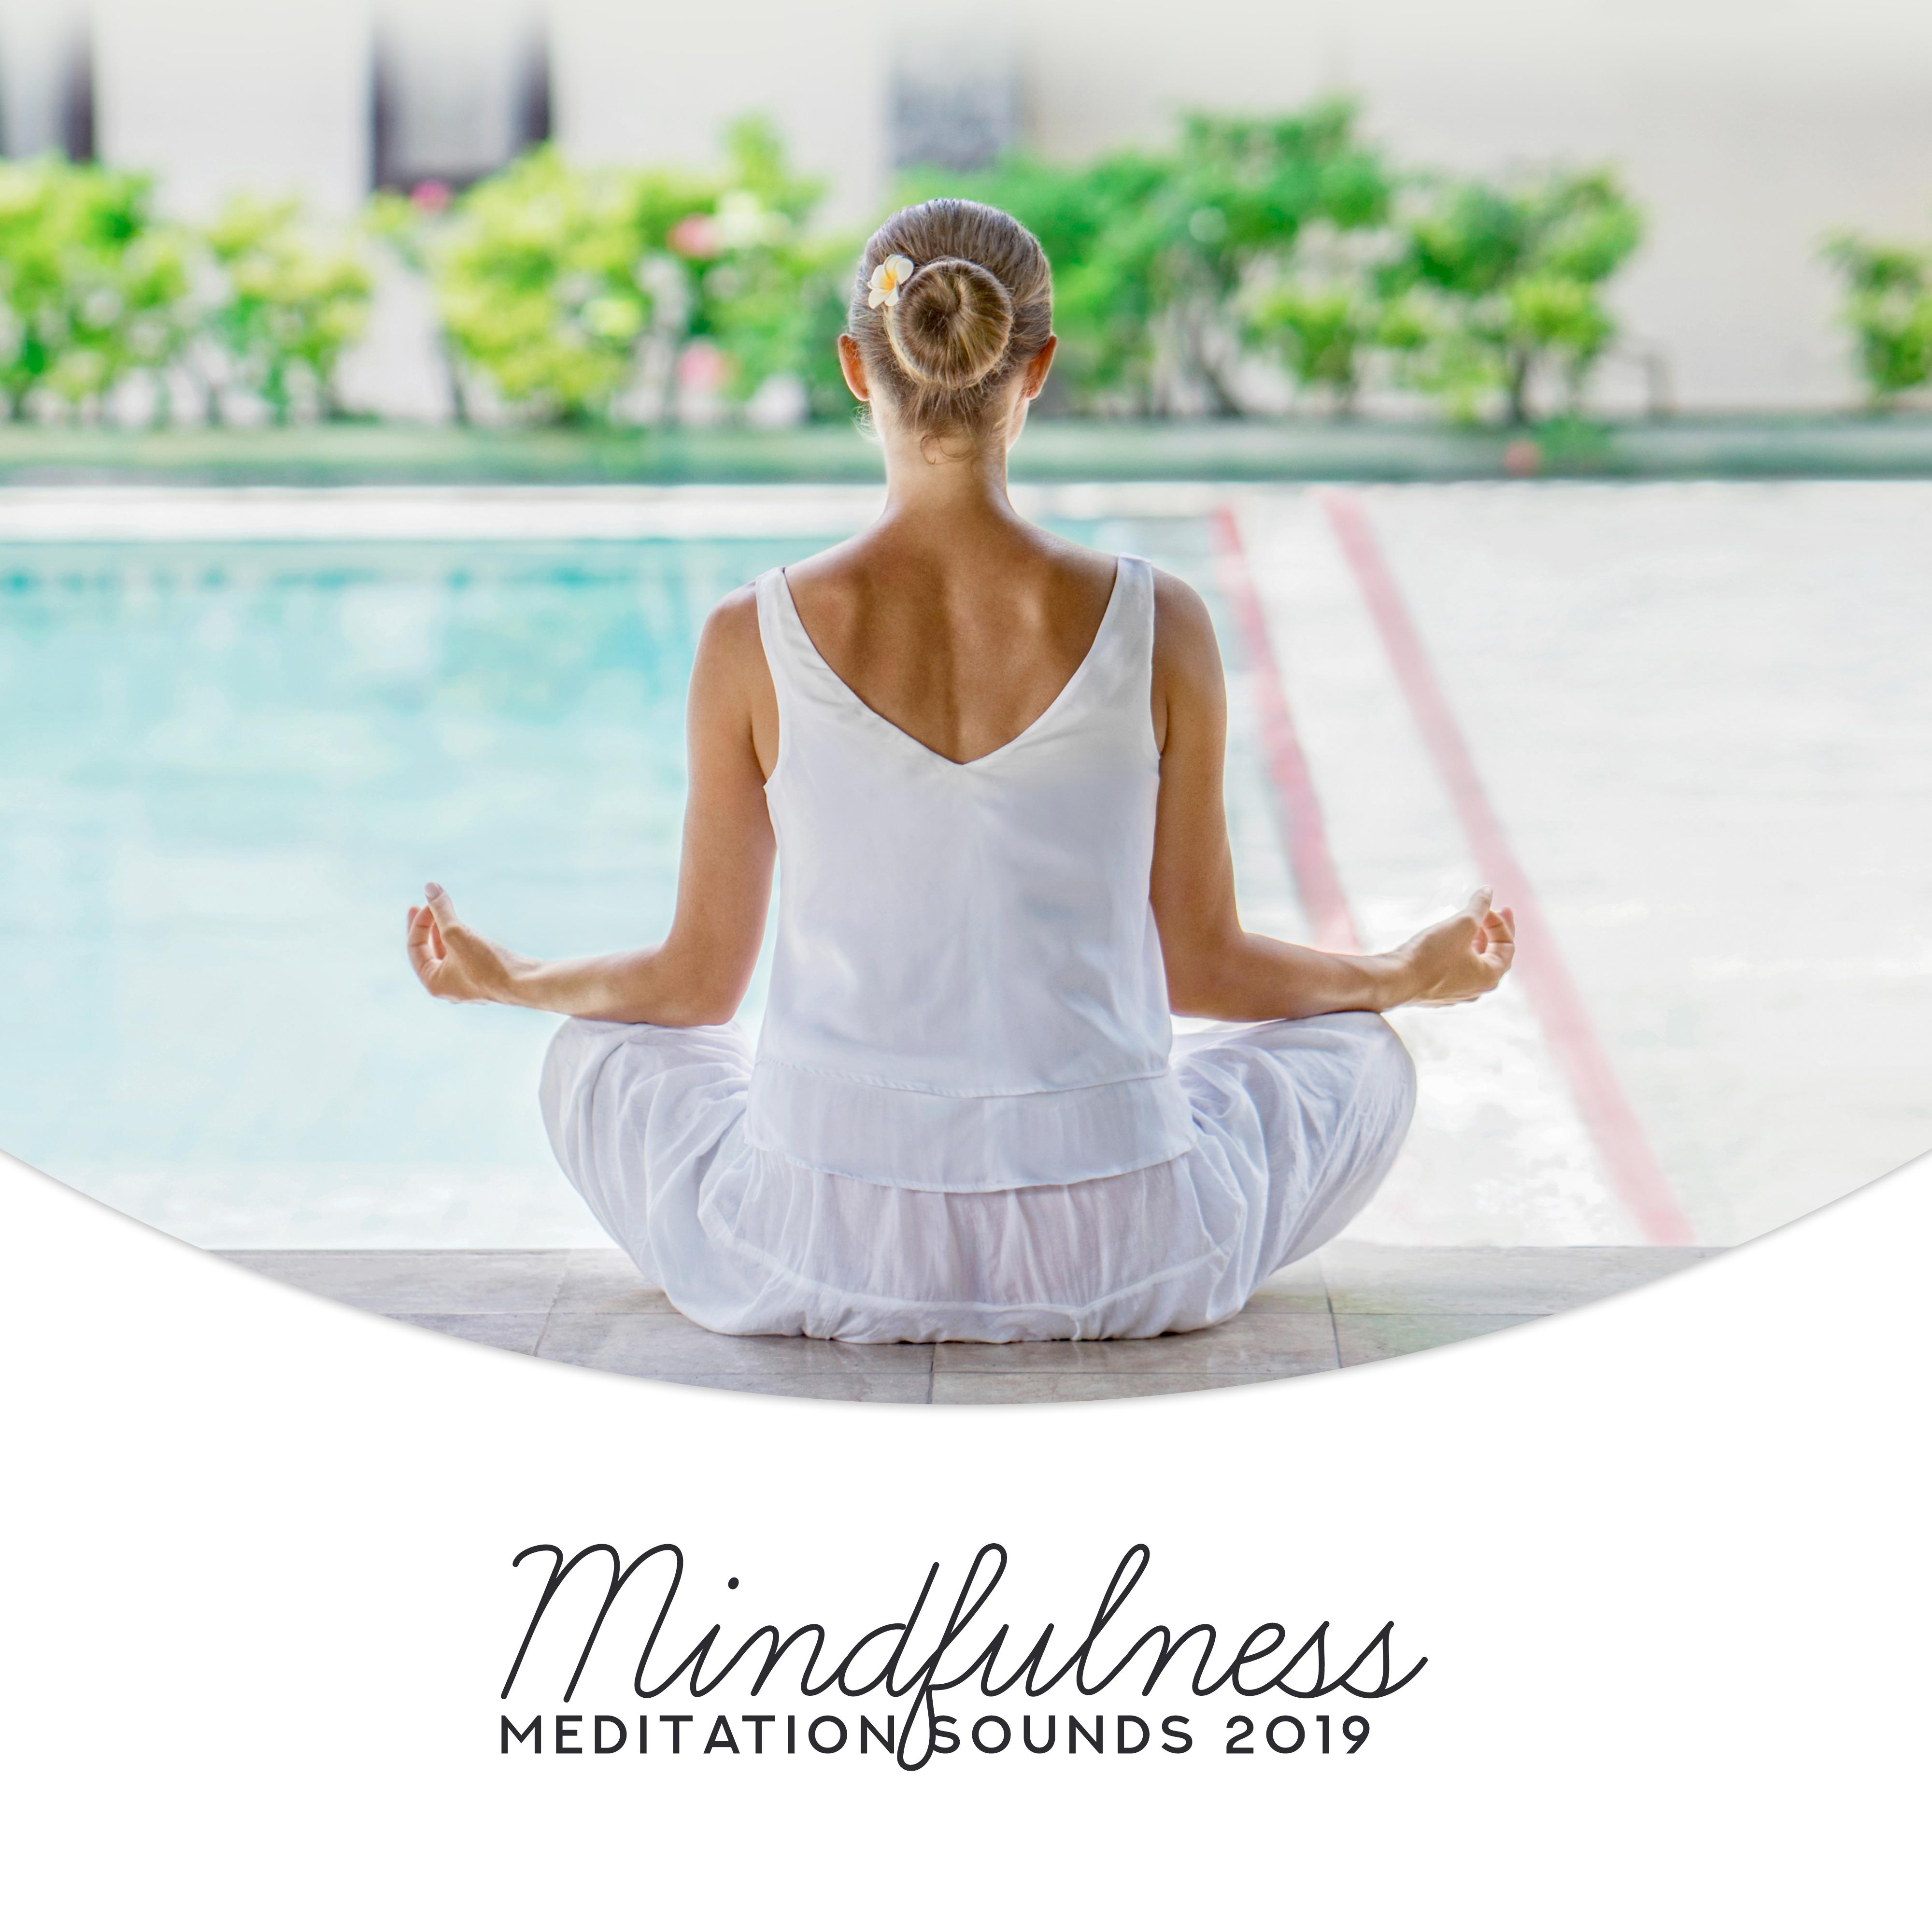 Mindfulness Meditation Sounds 2019: 15 New Age 2019 Songs for Yoga, Inner Calm, Mind & Body Connection